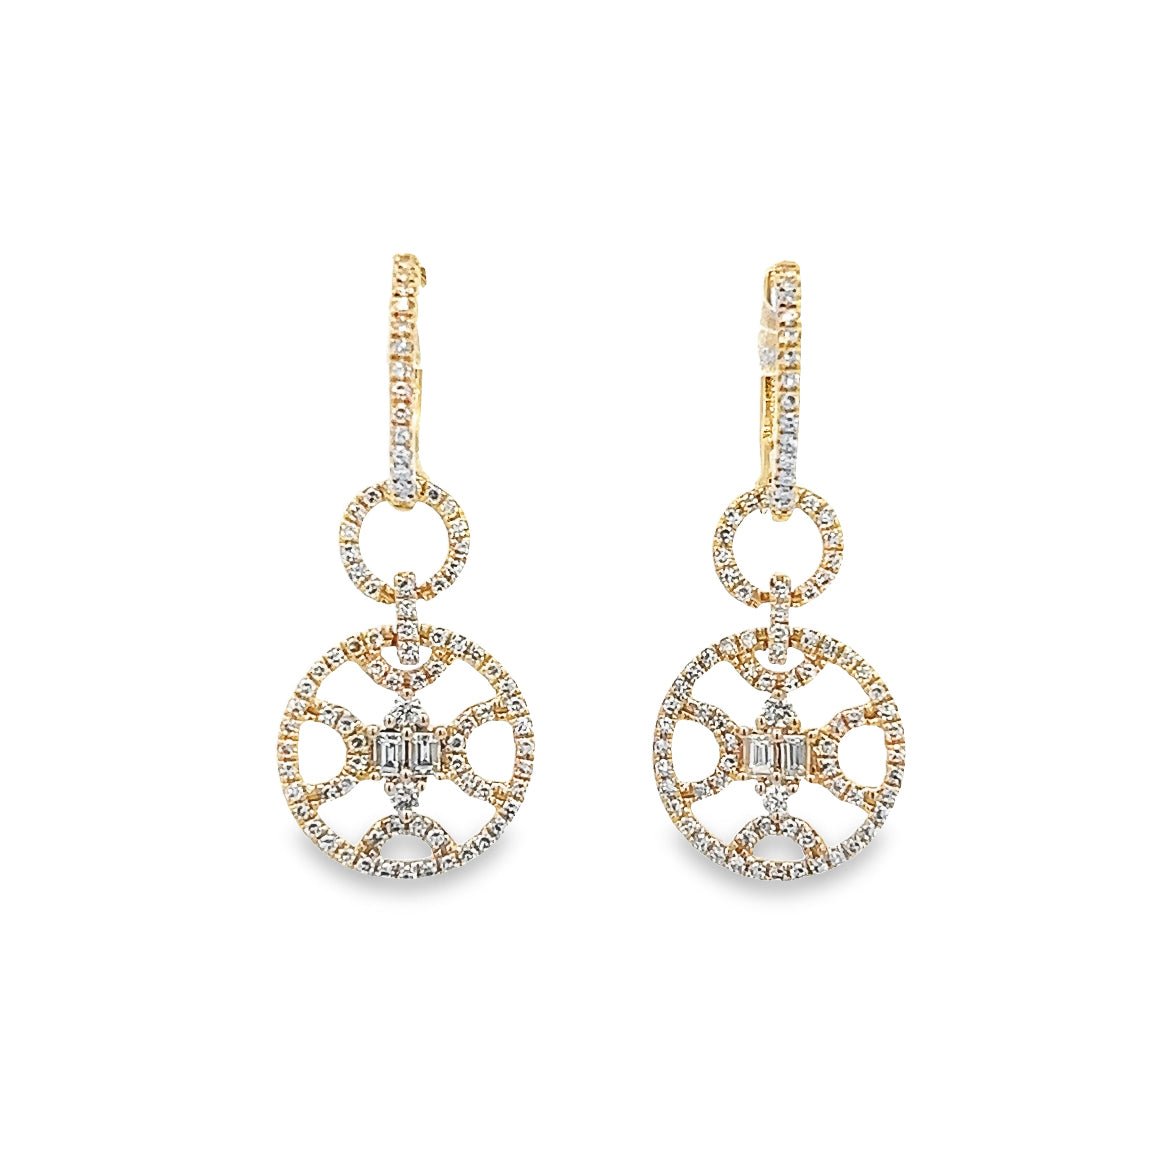 14K GOLD CIRCLE EARRINGS WITH BAGUETTE DIAMOND